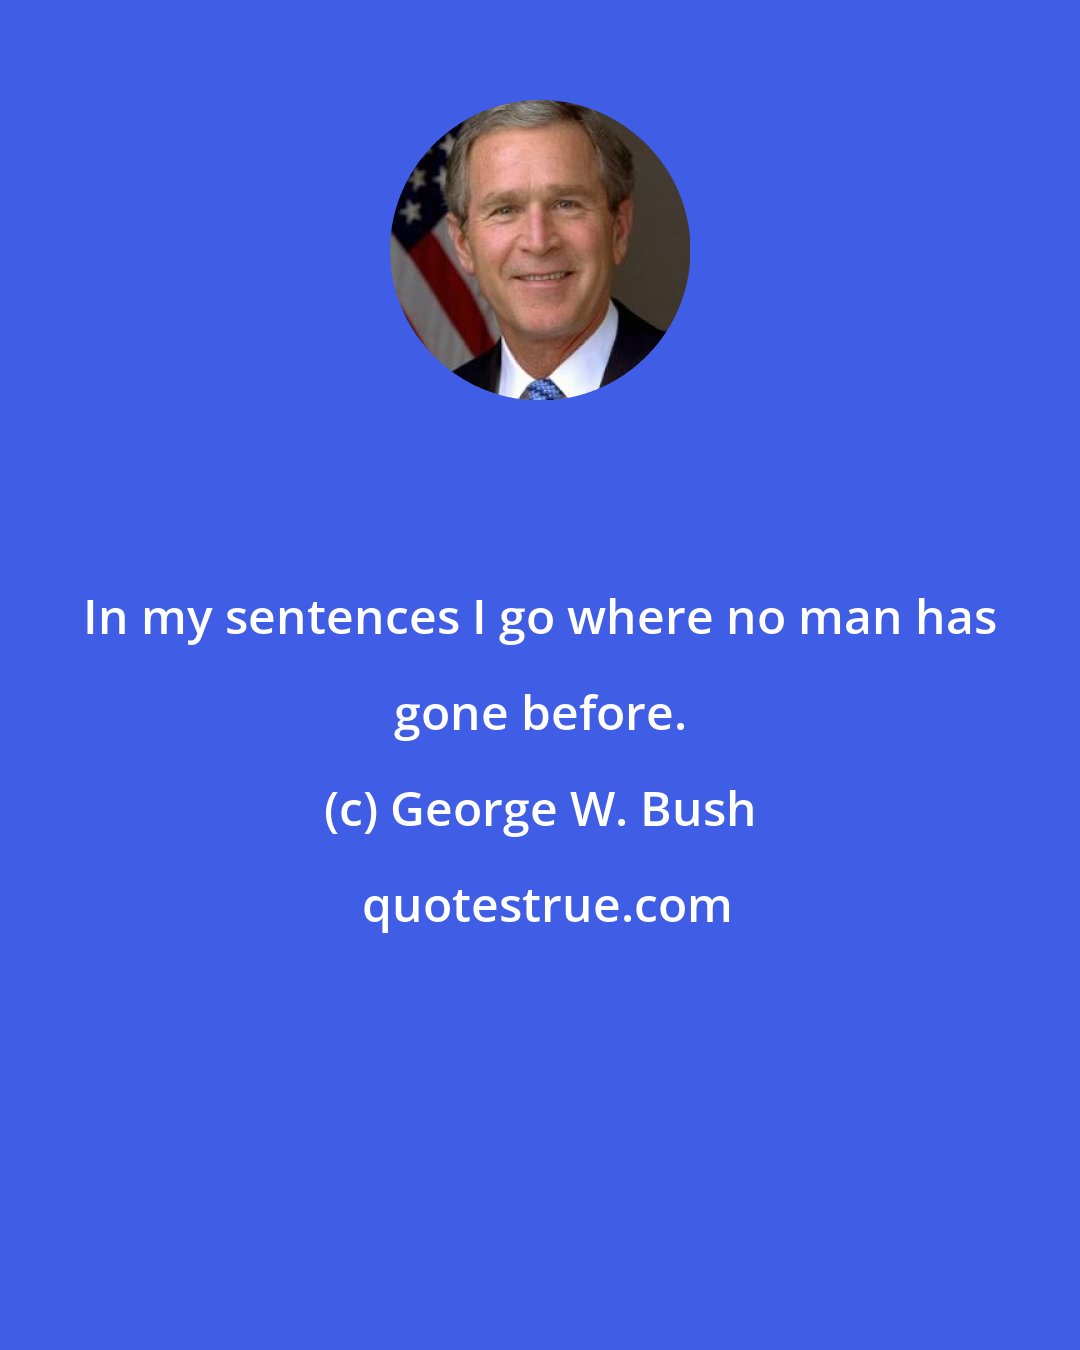 George W. Bush: In my sentences I go where no man has gone before.